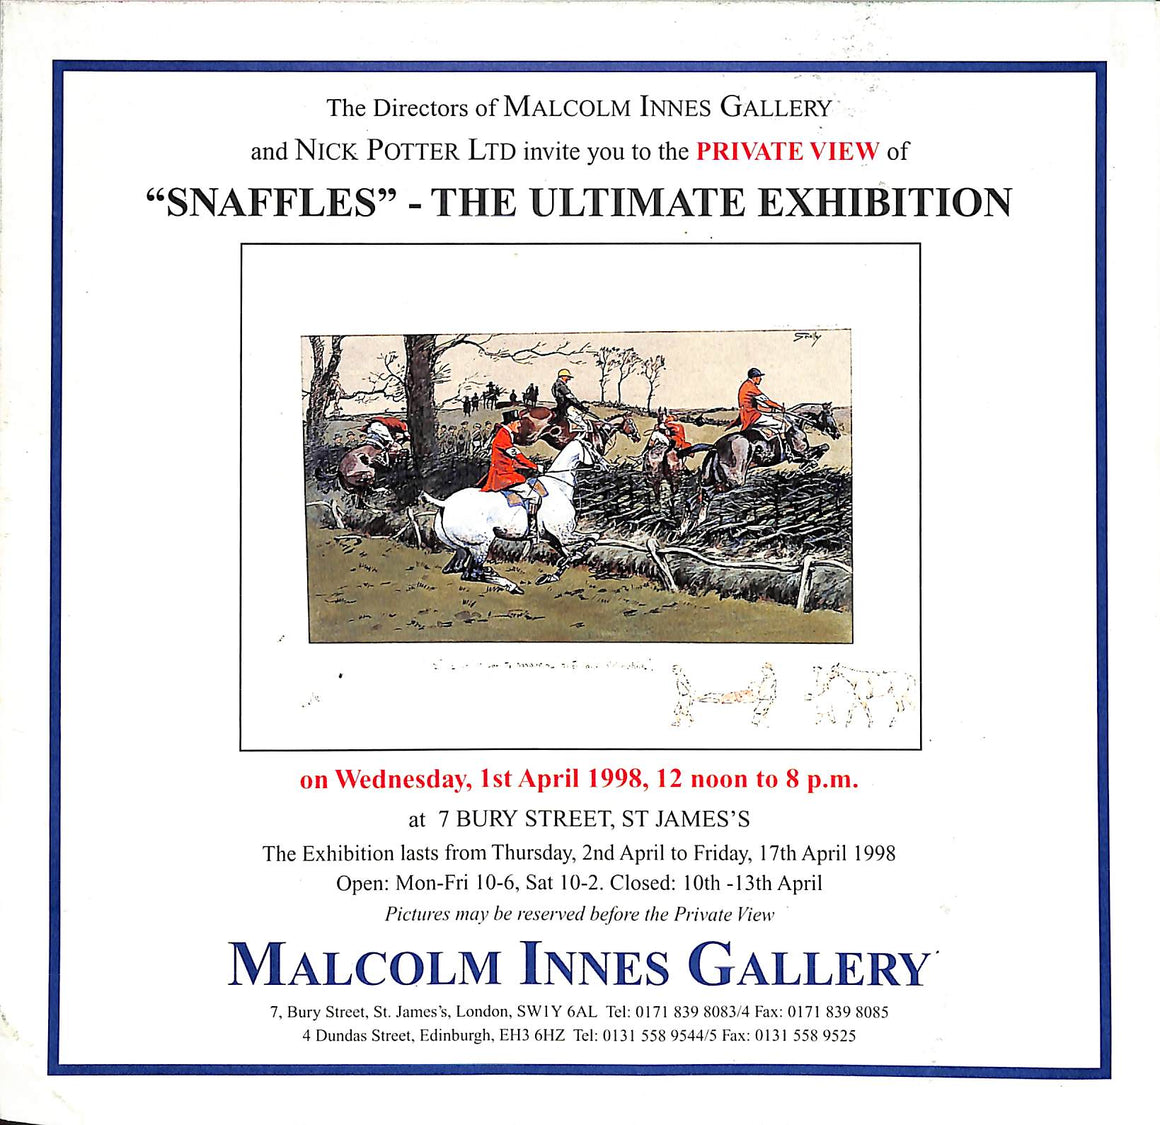 "Snaffles" - The Ultimate Exhibition: 1st April 1998